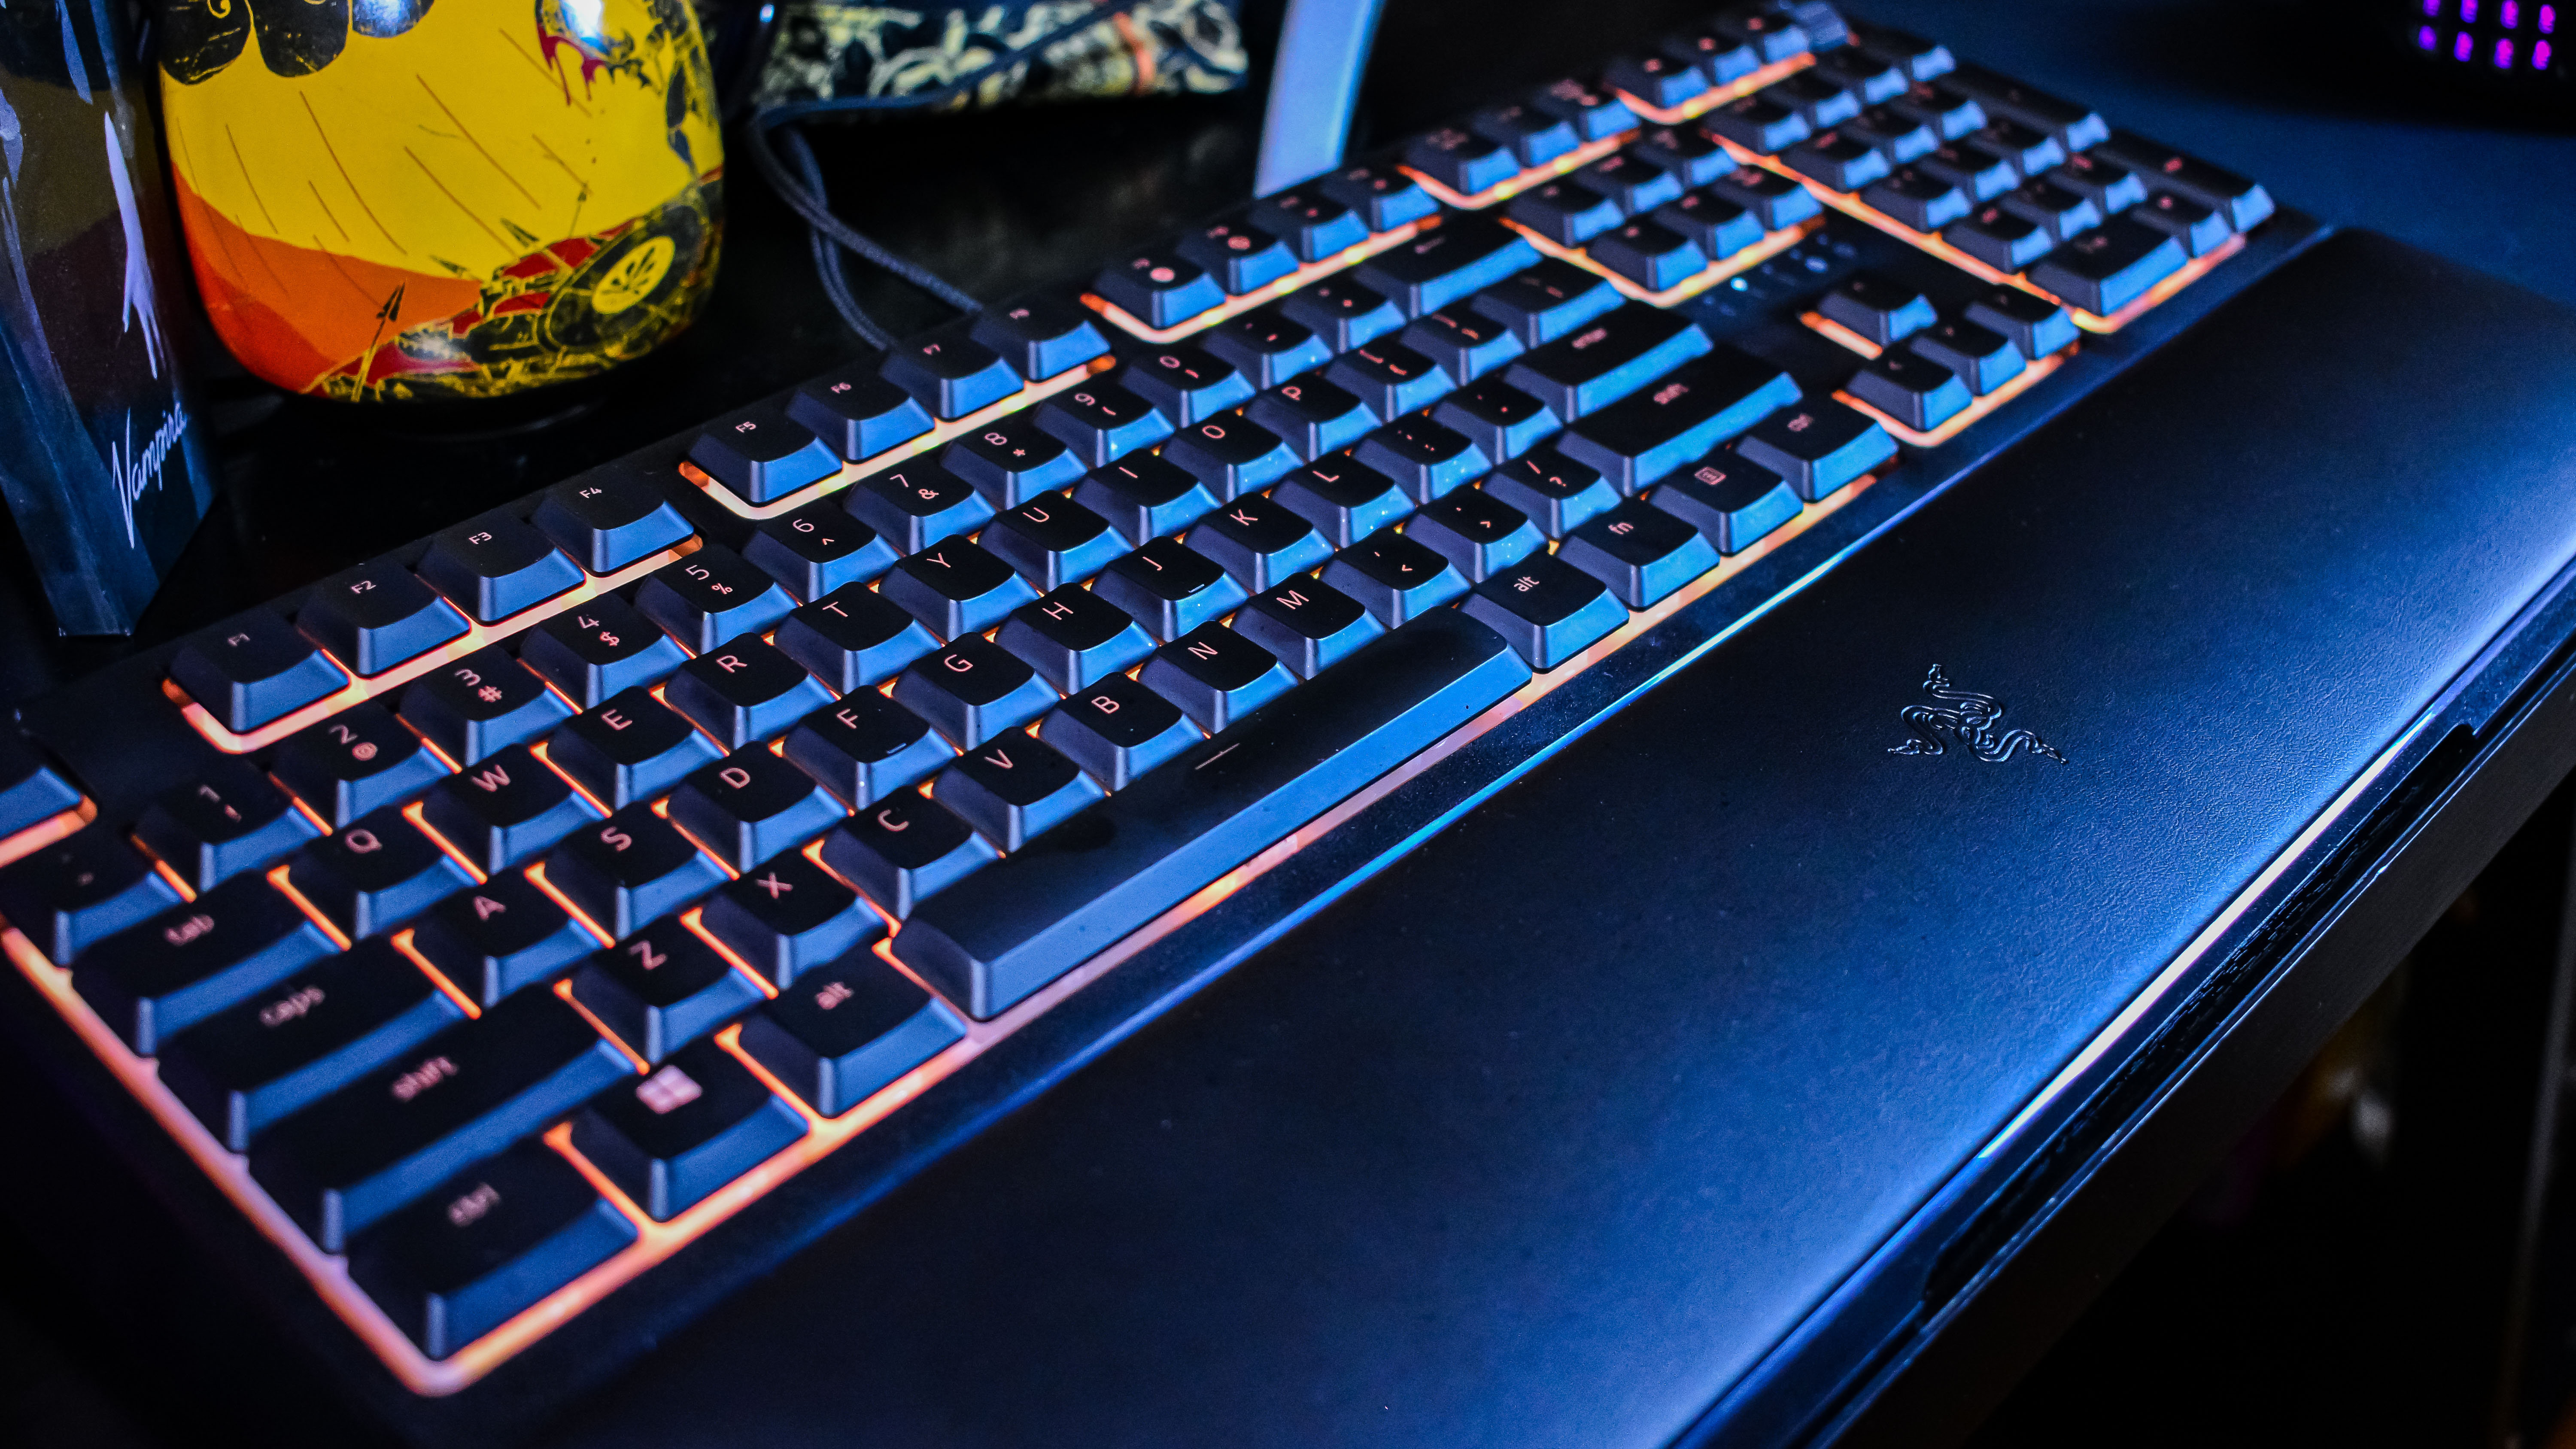 Best Gaming Keyboard 2020 The Best Gaming Keyboards You Can Buy